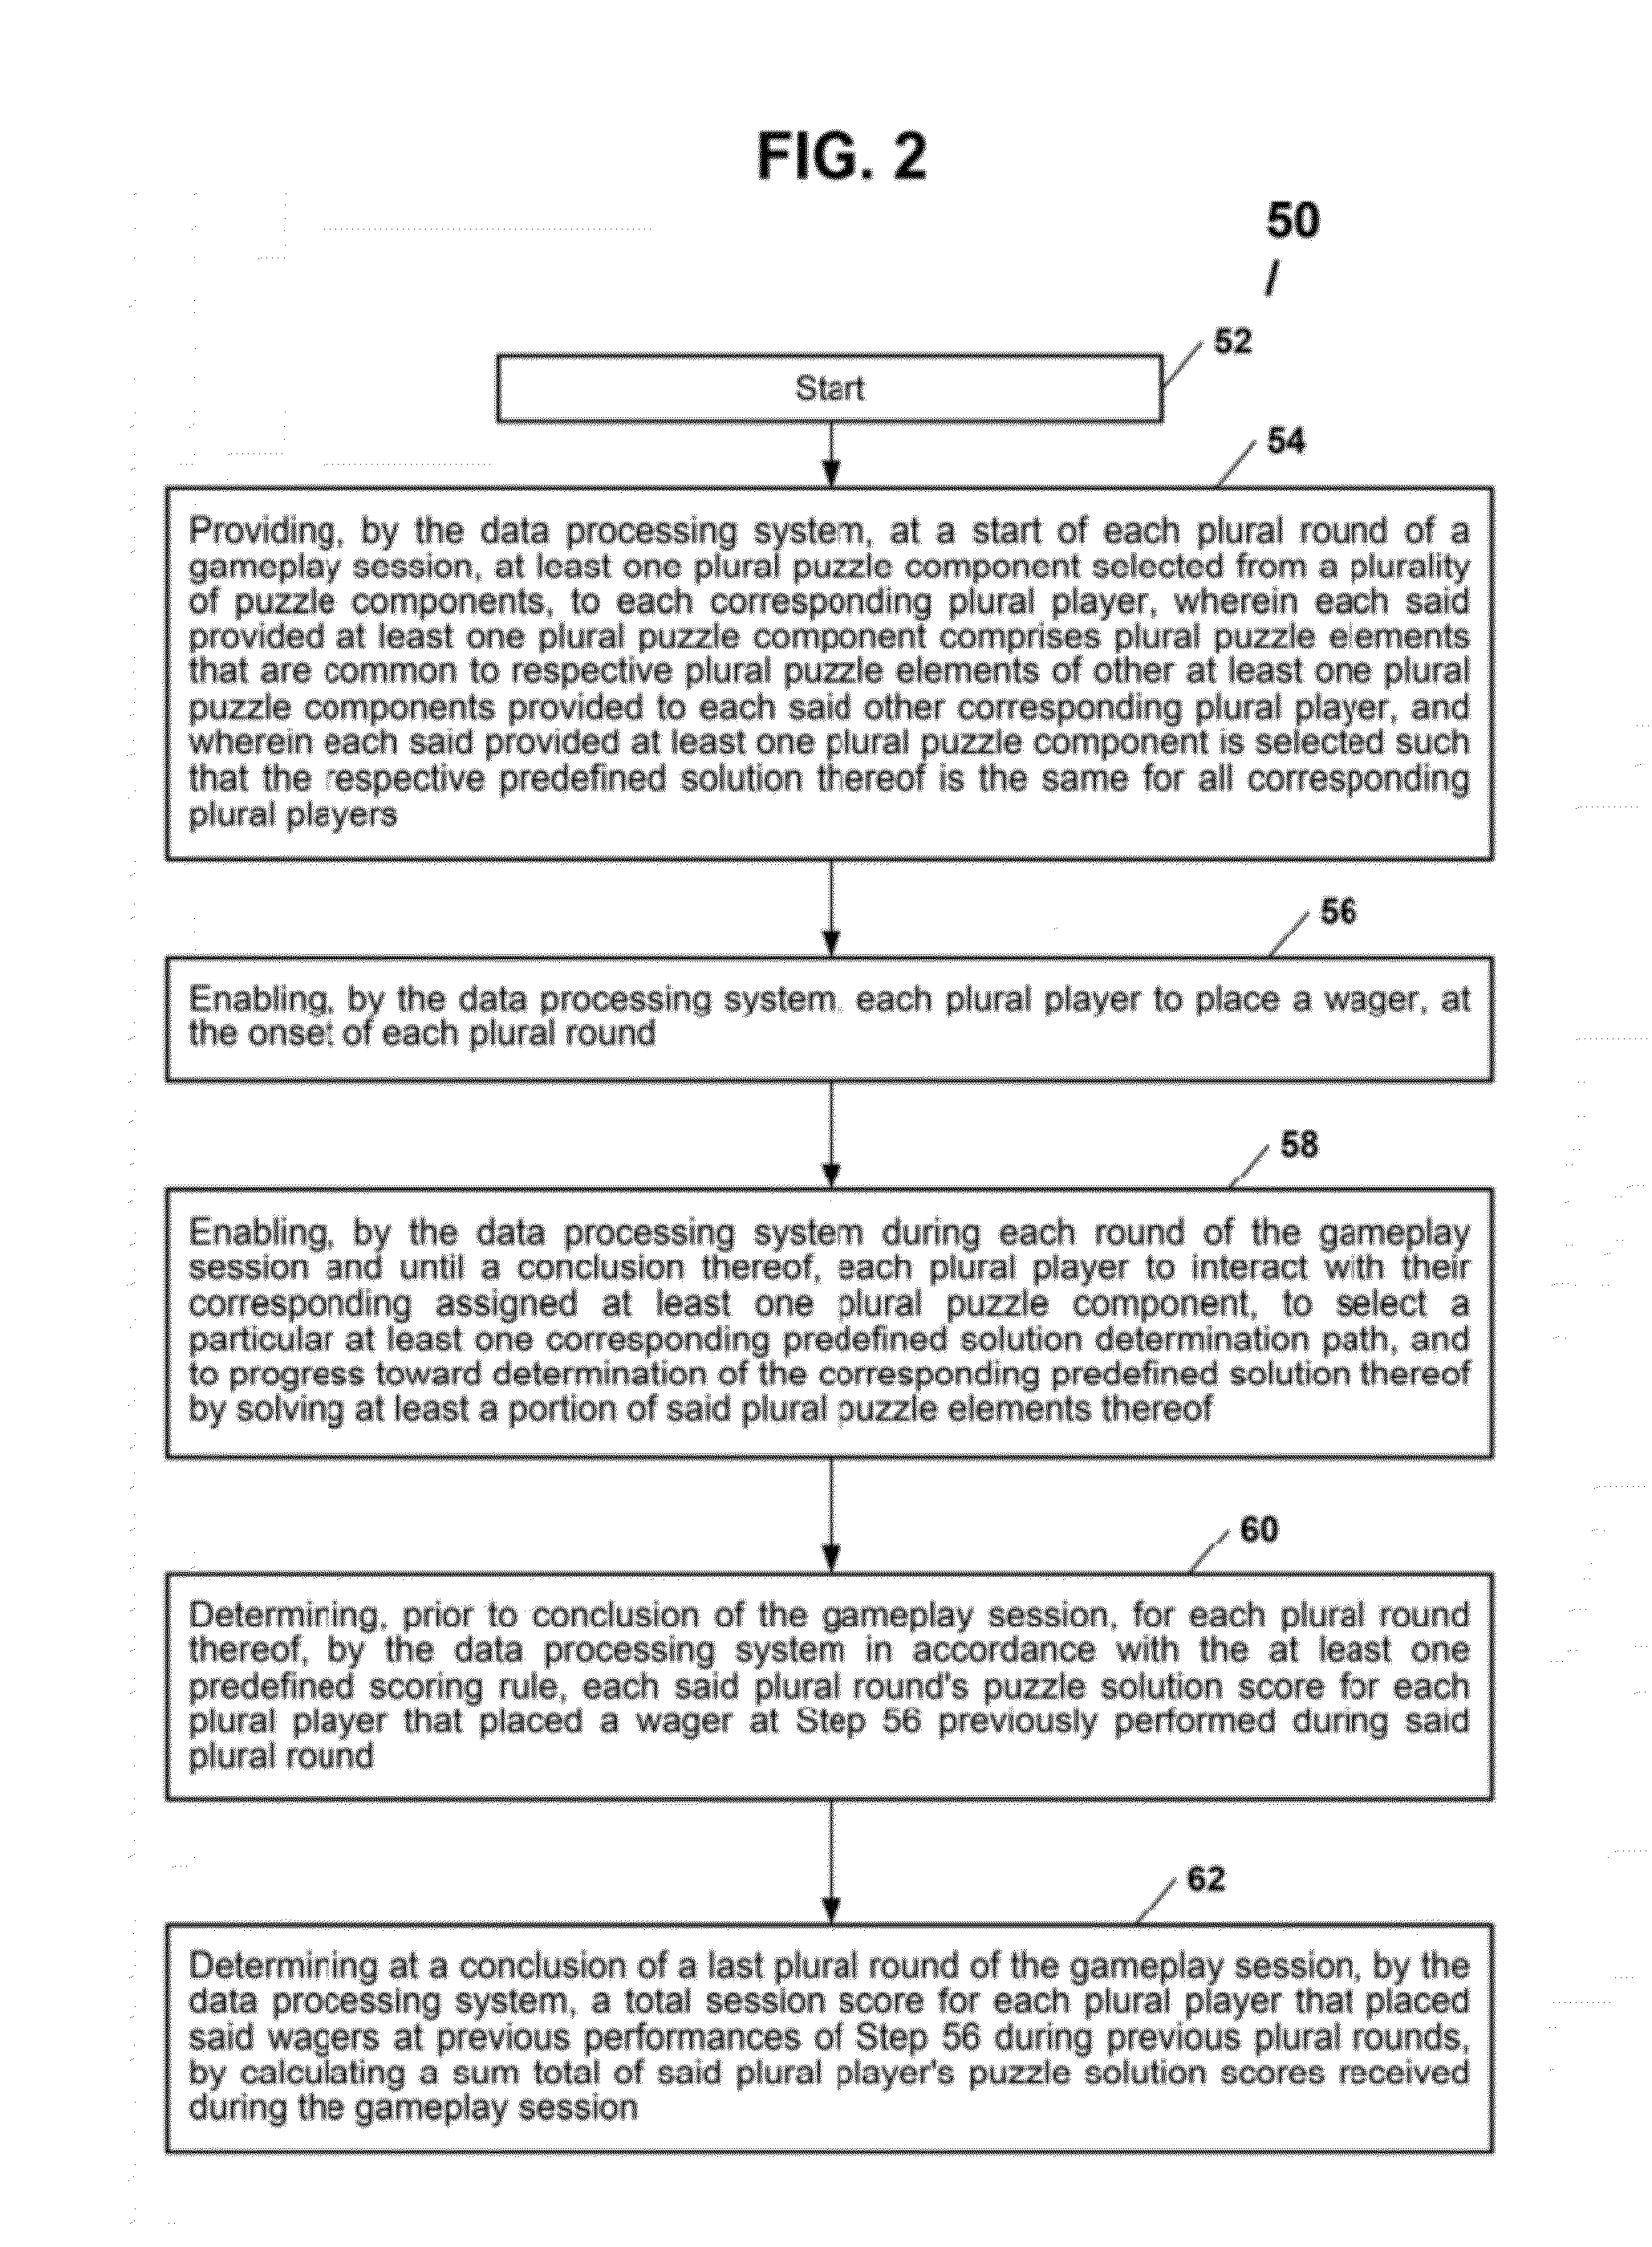 System and method for providing and managing a competitive puzzle-based game having at least one risk element